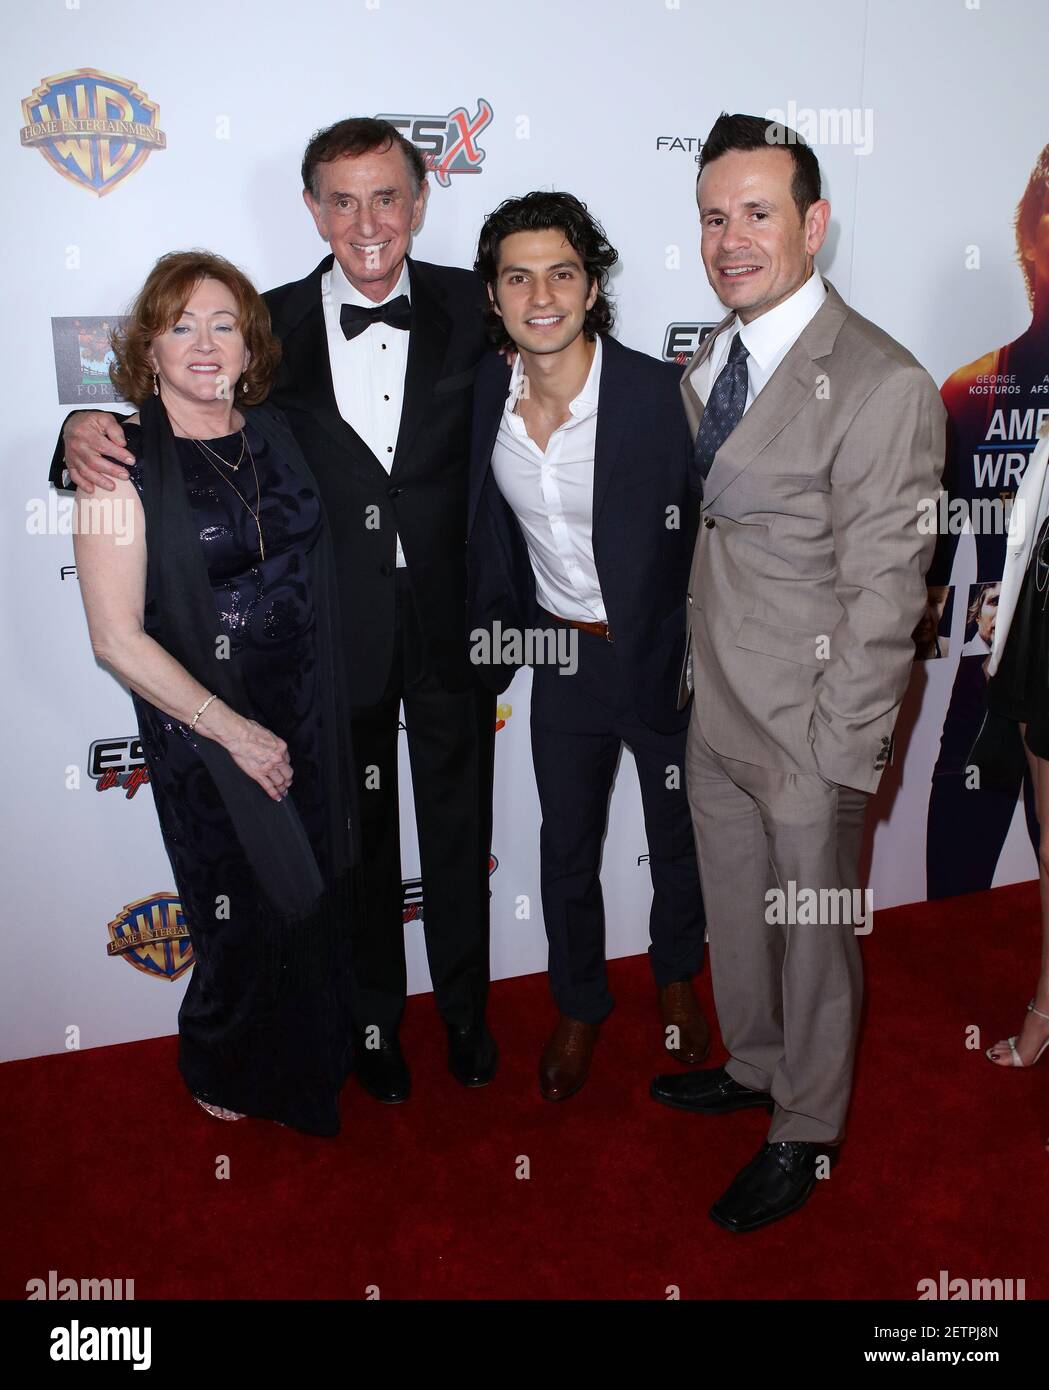 Forrest Lucas, Charlotte Lucas, George Kosturos and Alex Ranarivelo at the Warner Bros. 'American Wrestler: The Wizard' Los Angeles Premiere held at the Regal L.A. Live on April 26, 2017 in Los Angeles, California, United States (Photo by Art Garcia) *** Please Use Credit from Credit Field *** Stock Photo